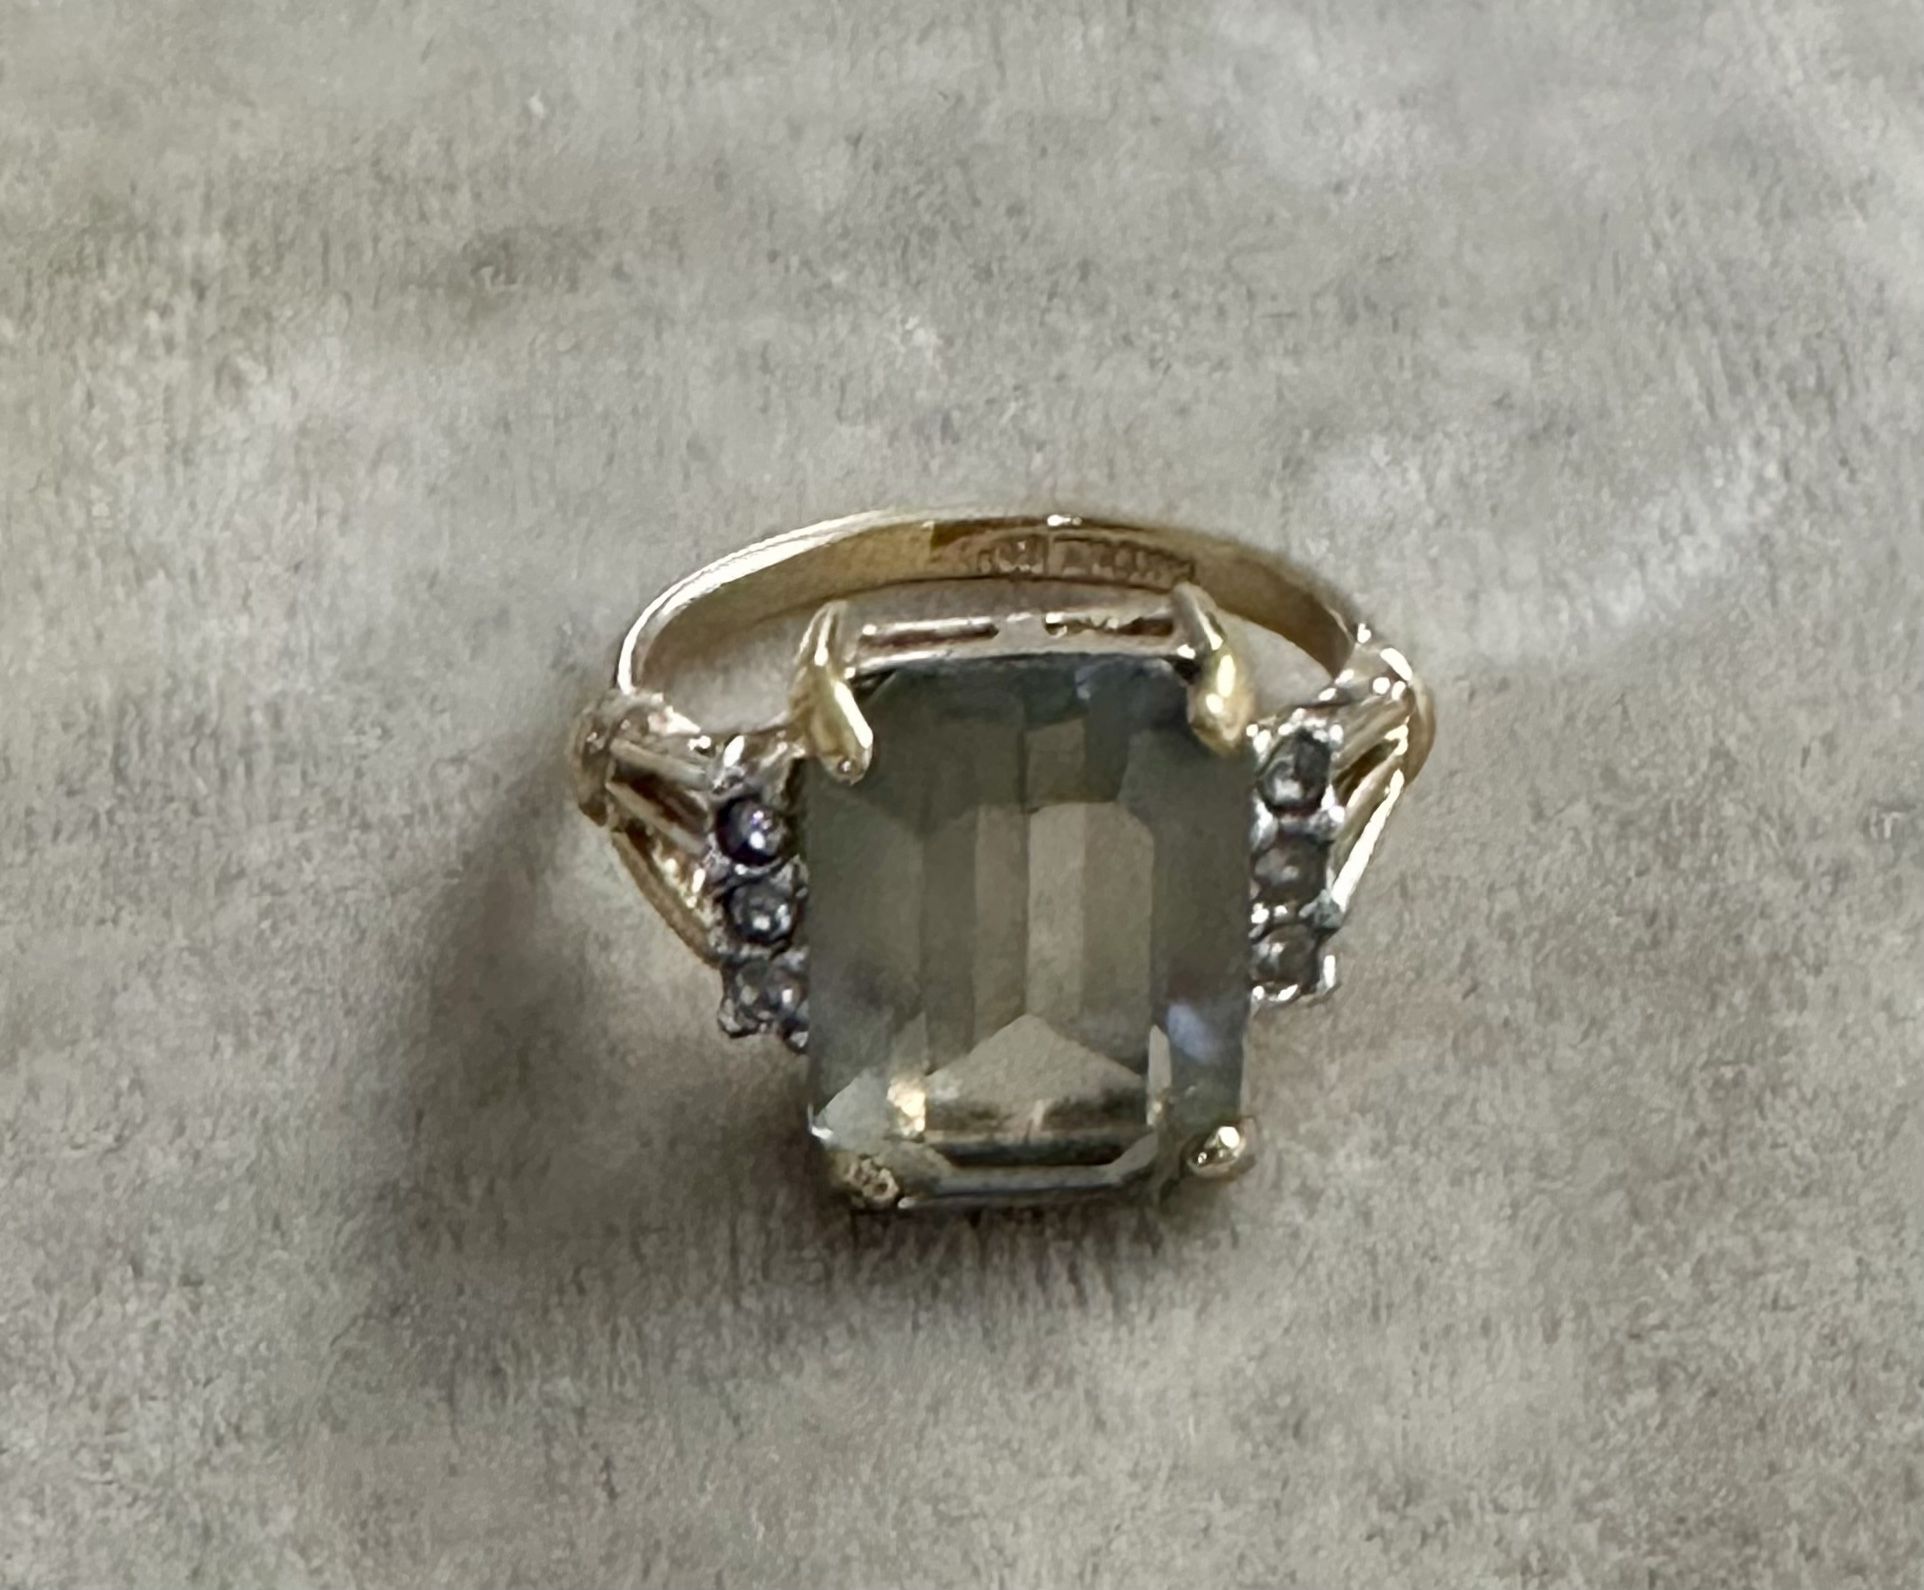 Vintage 14k Gold Plated ESPO signed Ring , Gray & Clear Rhinestones, Size 7, 4.6 Grams Total Weight 